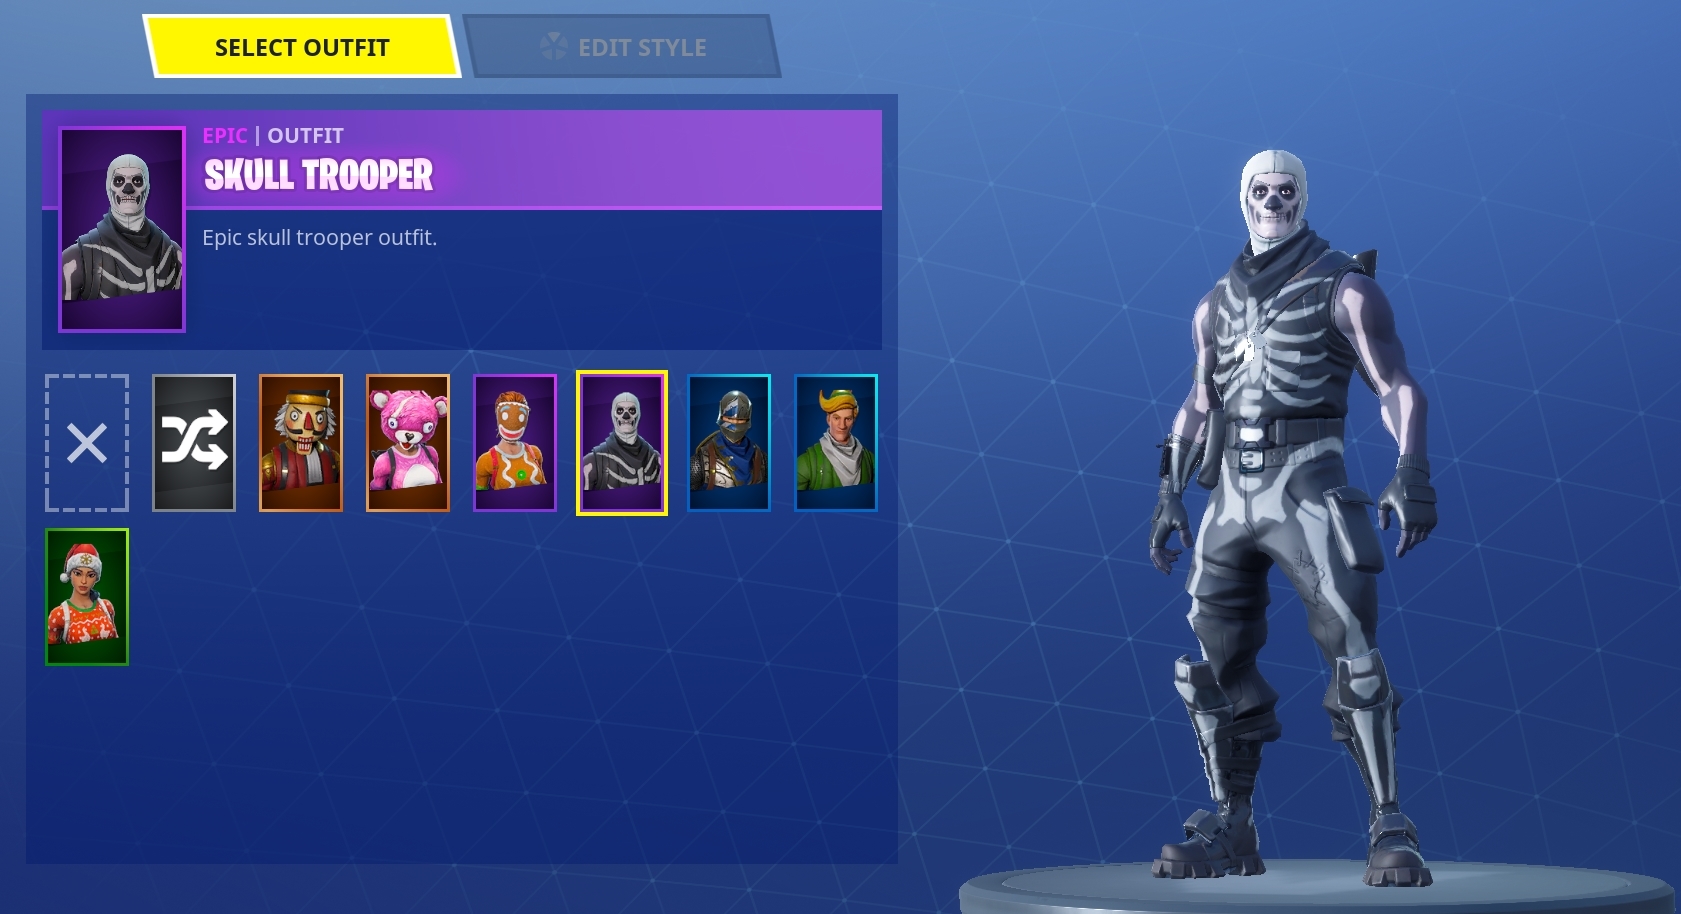 Cracked fortnite account with skull trooper, ginger gunner, nog ops, and more-352b459eb96721910c2f1cbb4e86f69d-jpg